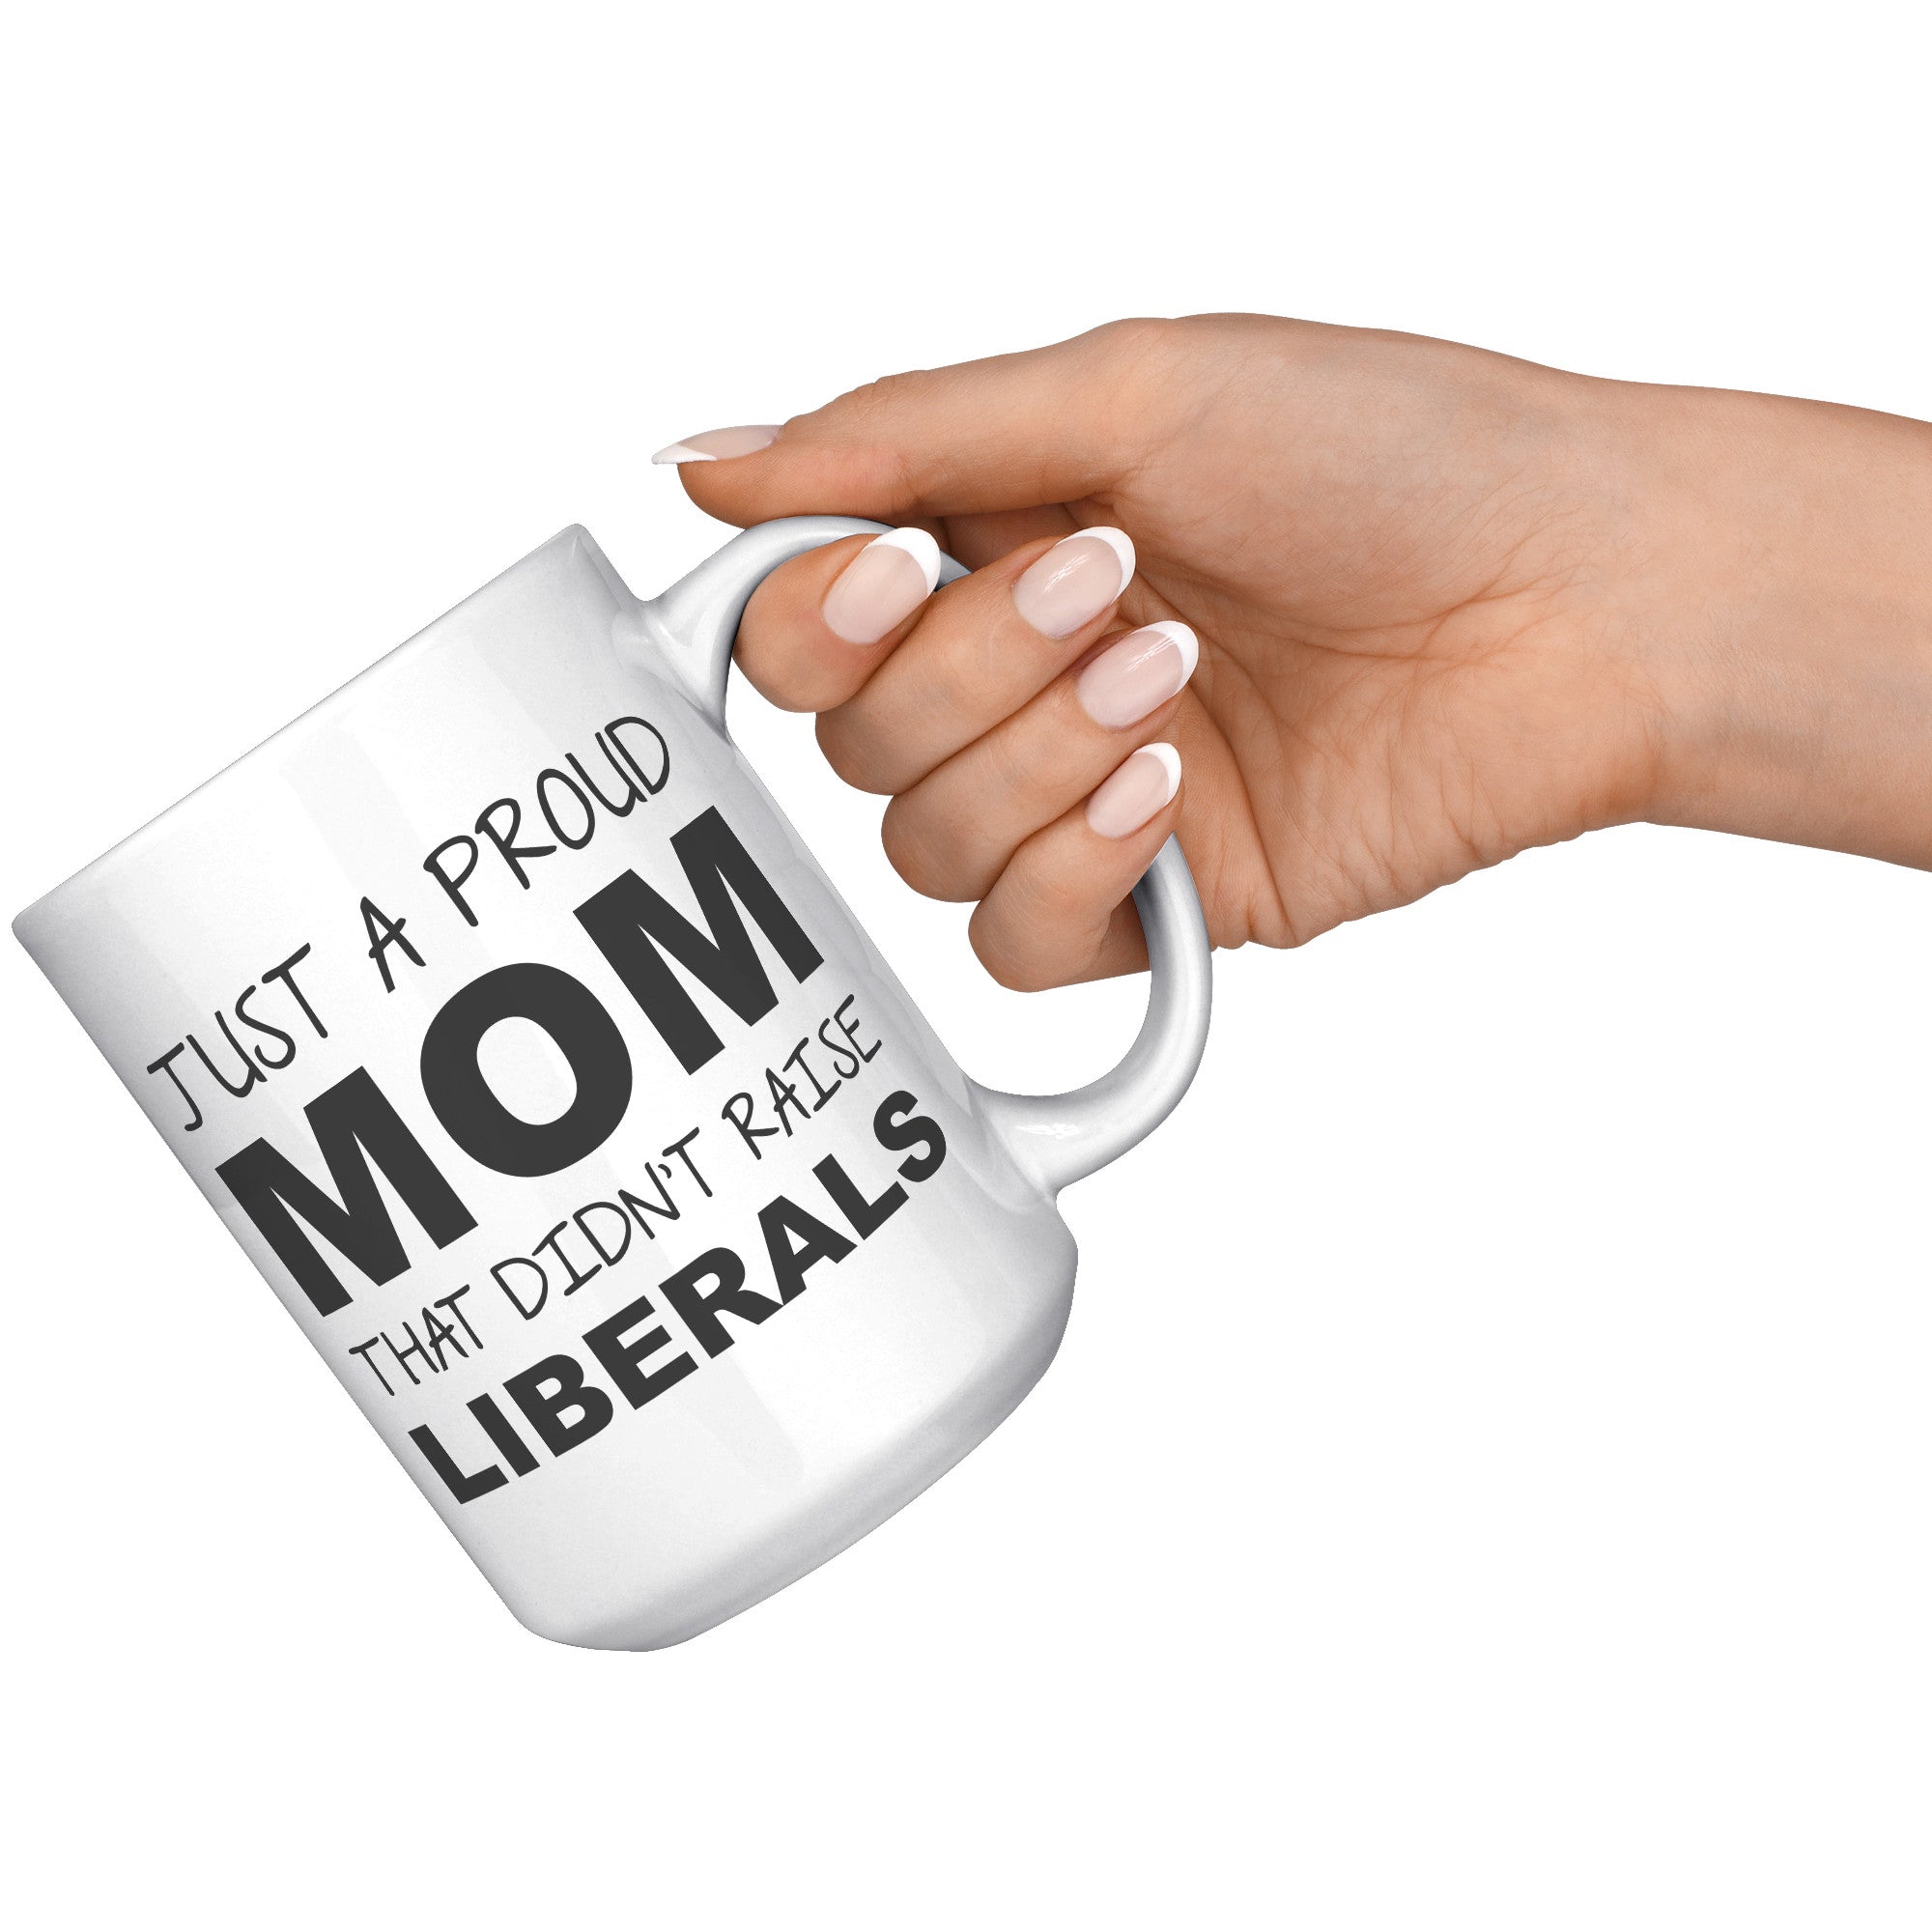 Just A Proud Mom That Didn't Raise Liberals Mother's Day Coffee Mug -Front/Back | Drunk America 